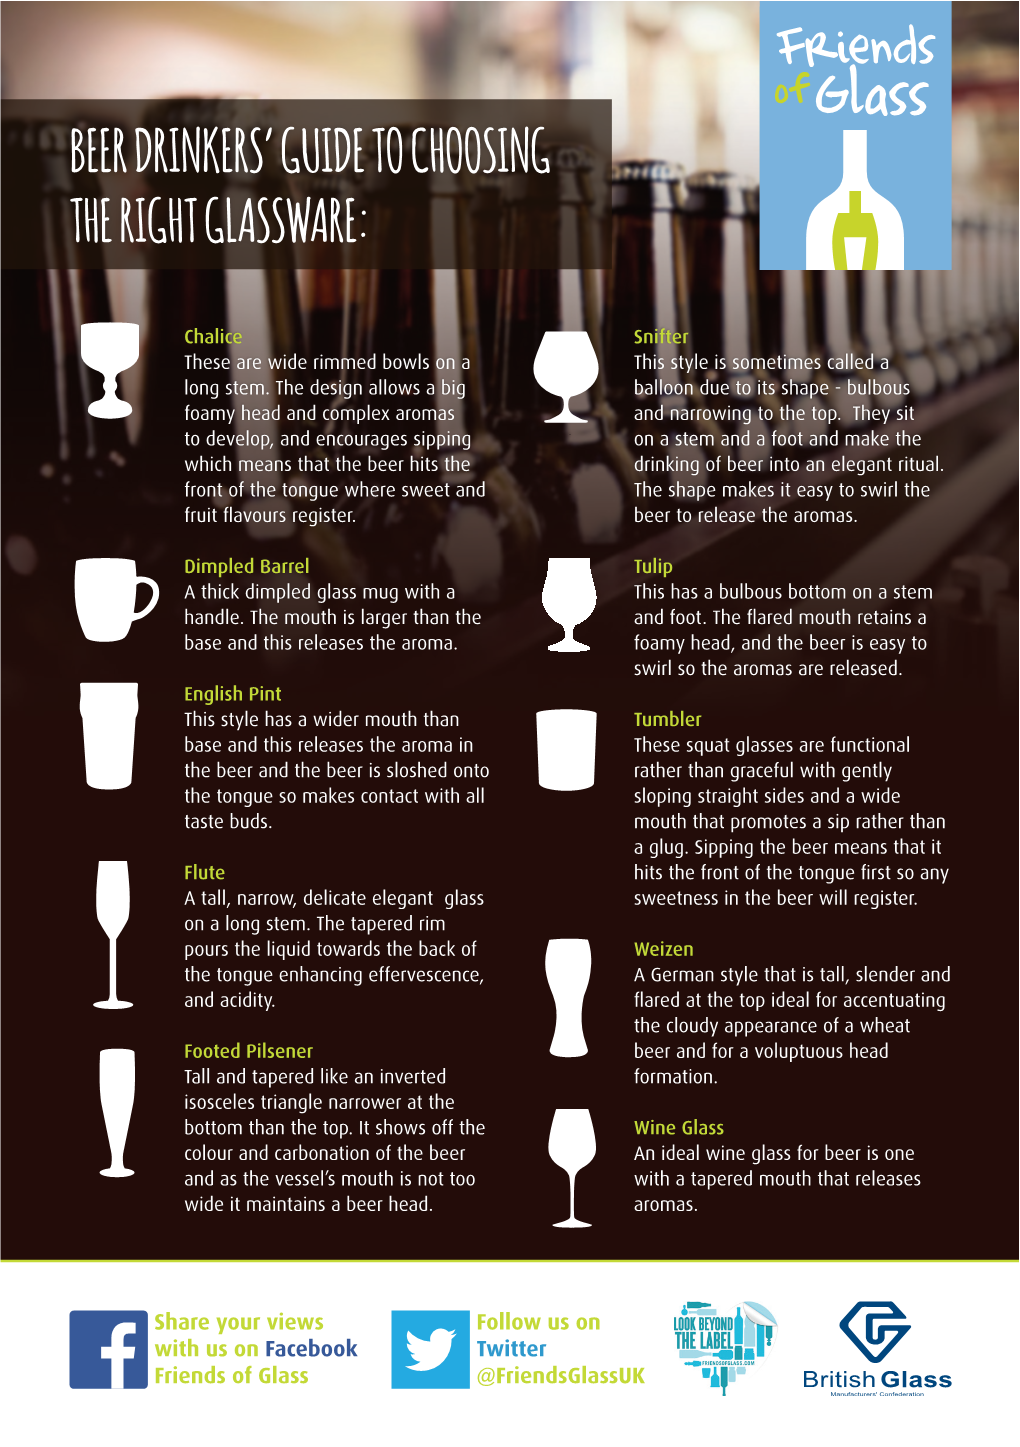 Beer Drinkers' Guide to Choosing the Right Glassware